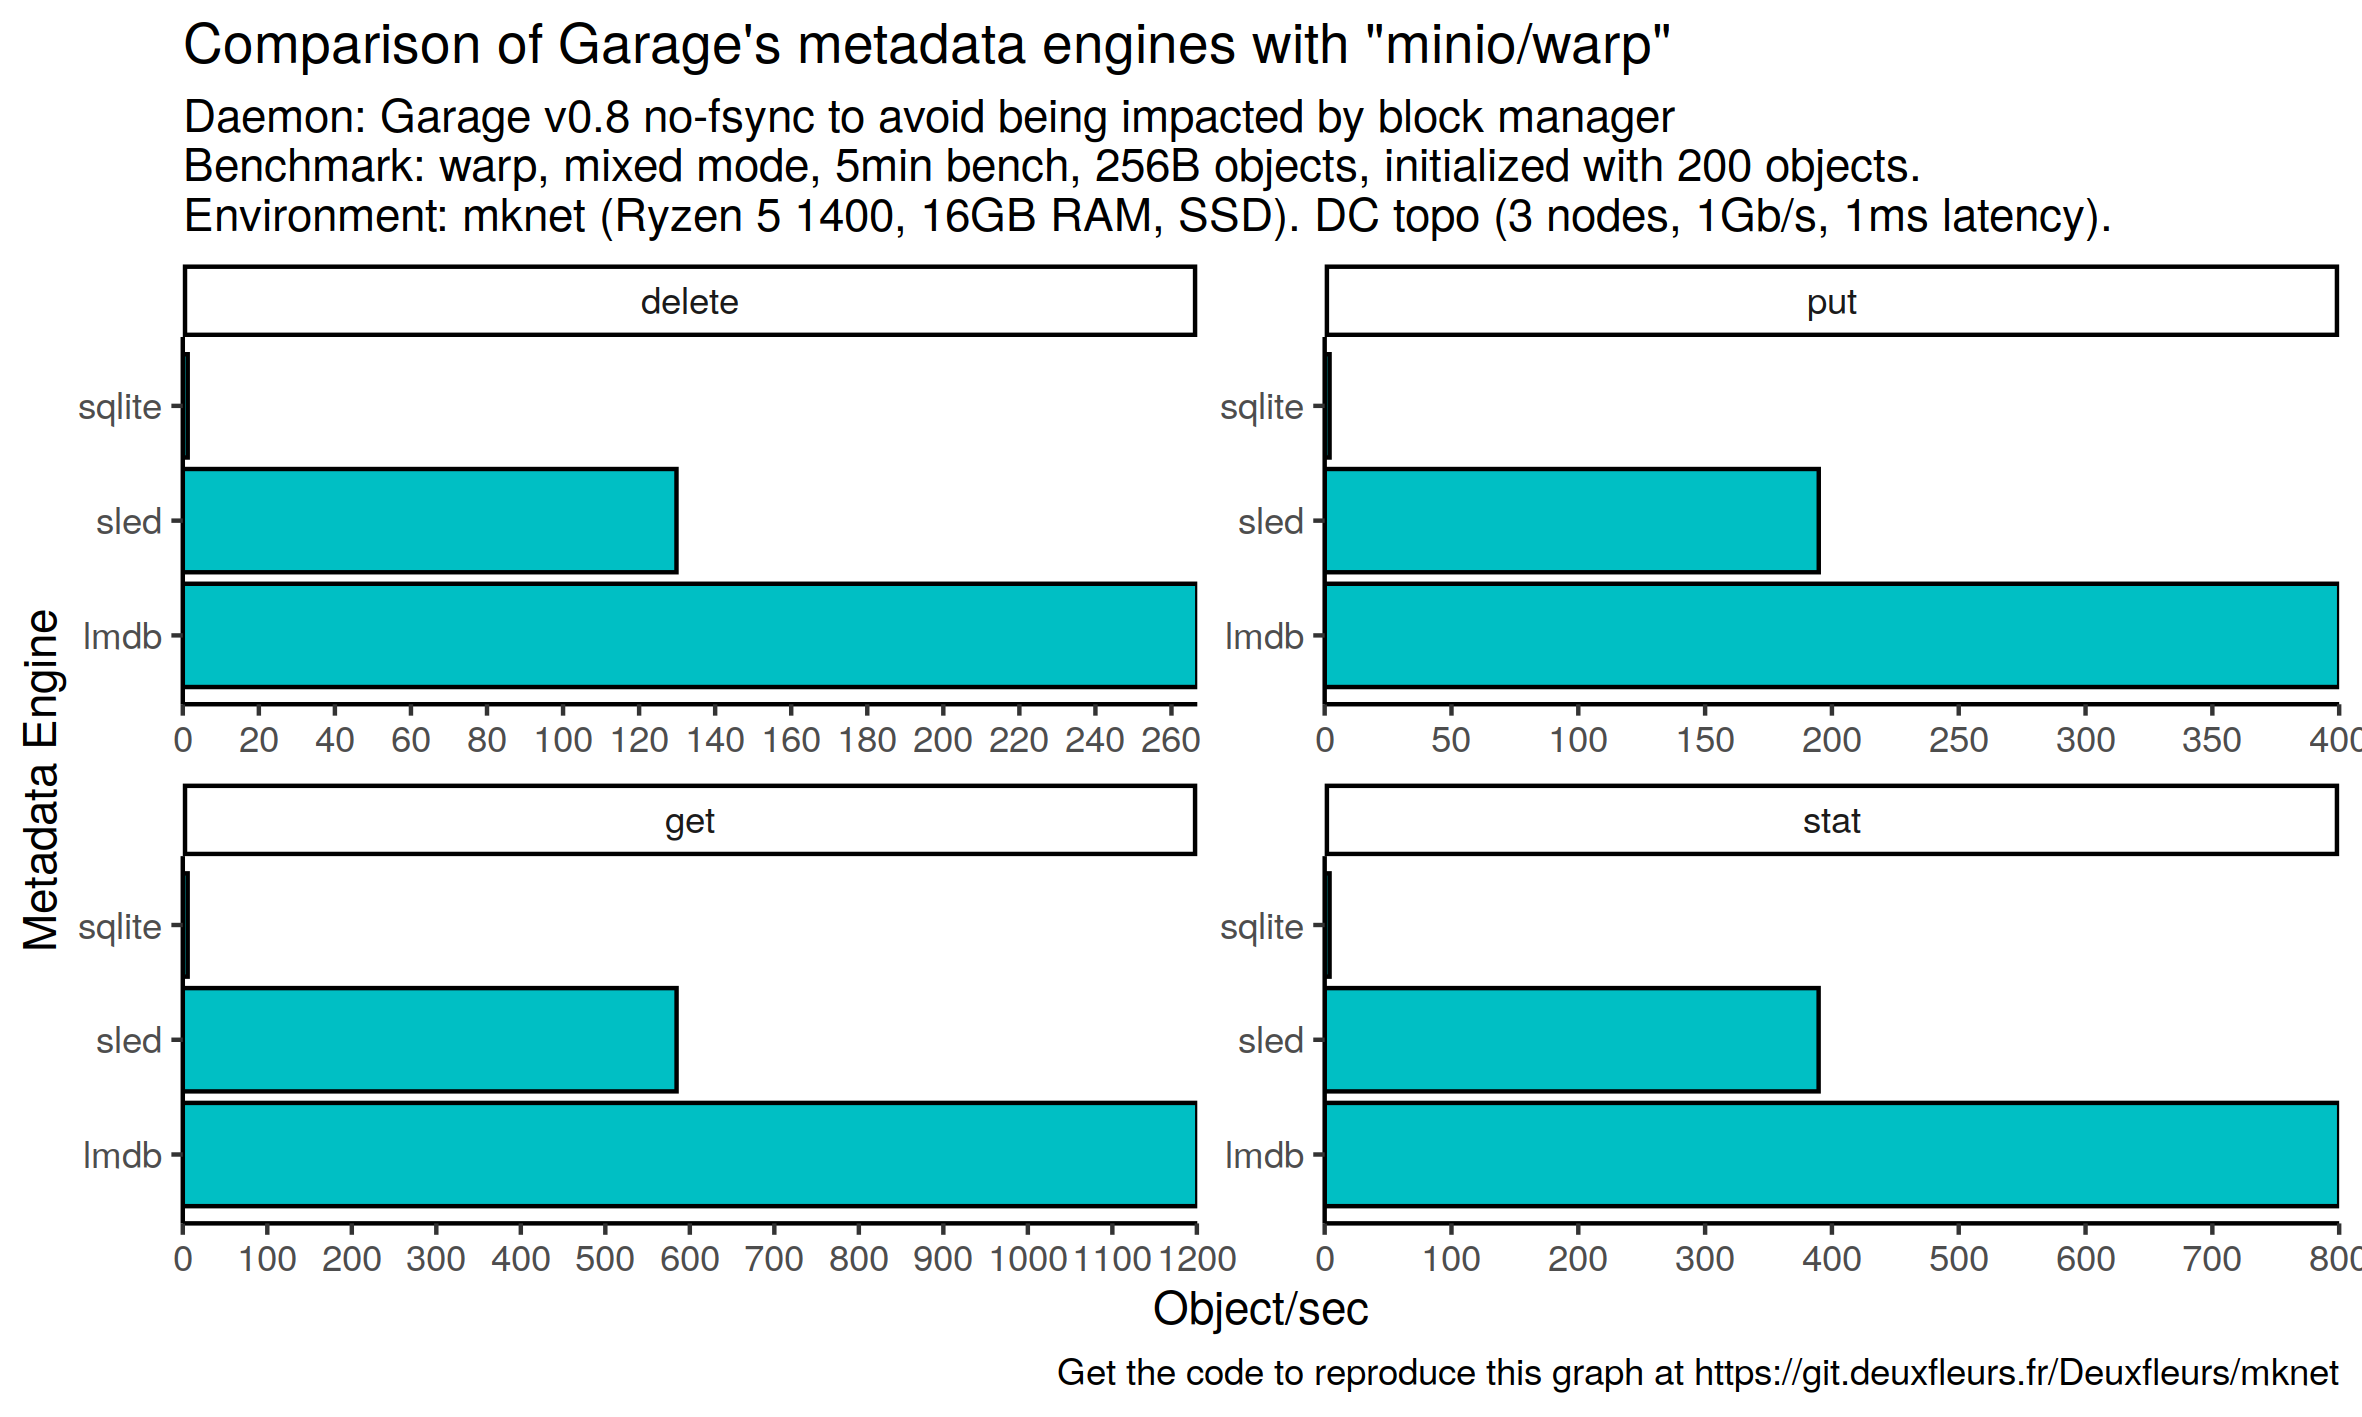 Plot of our metadata engines comparison with Warp